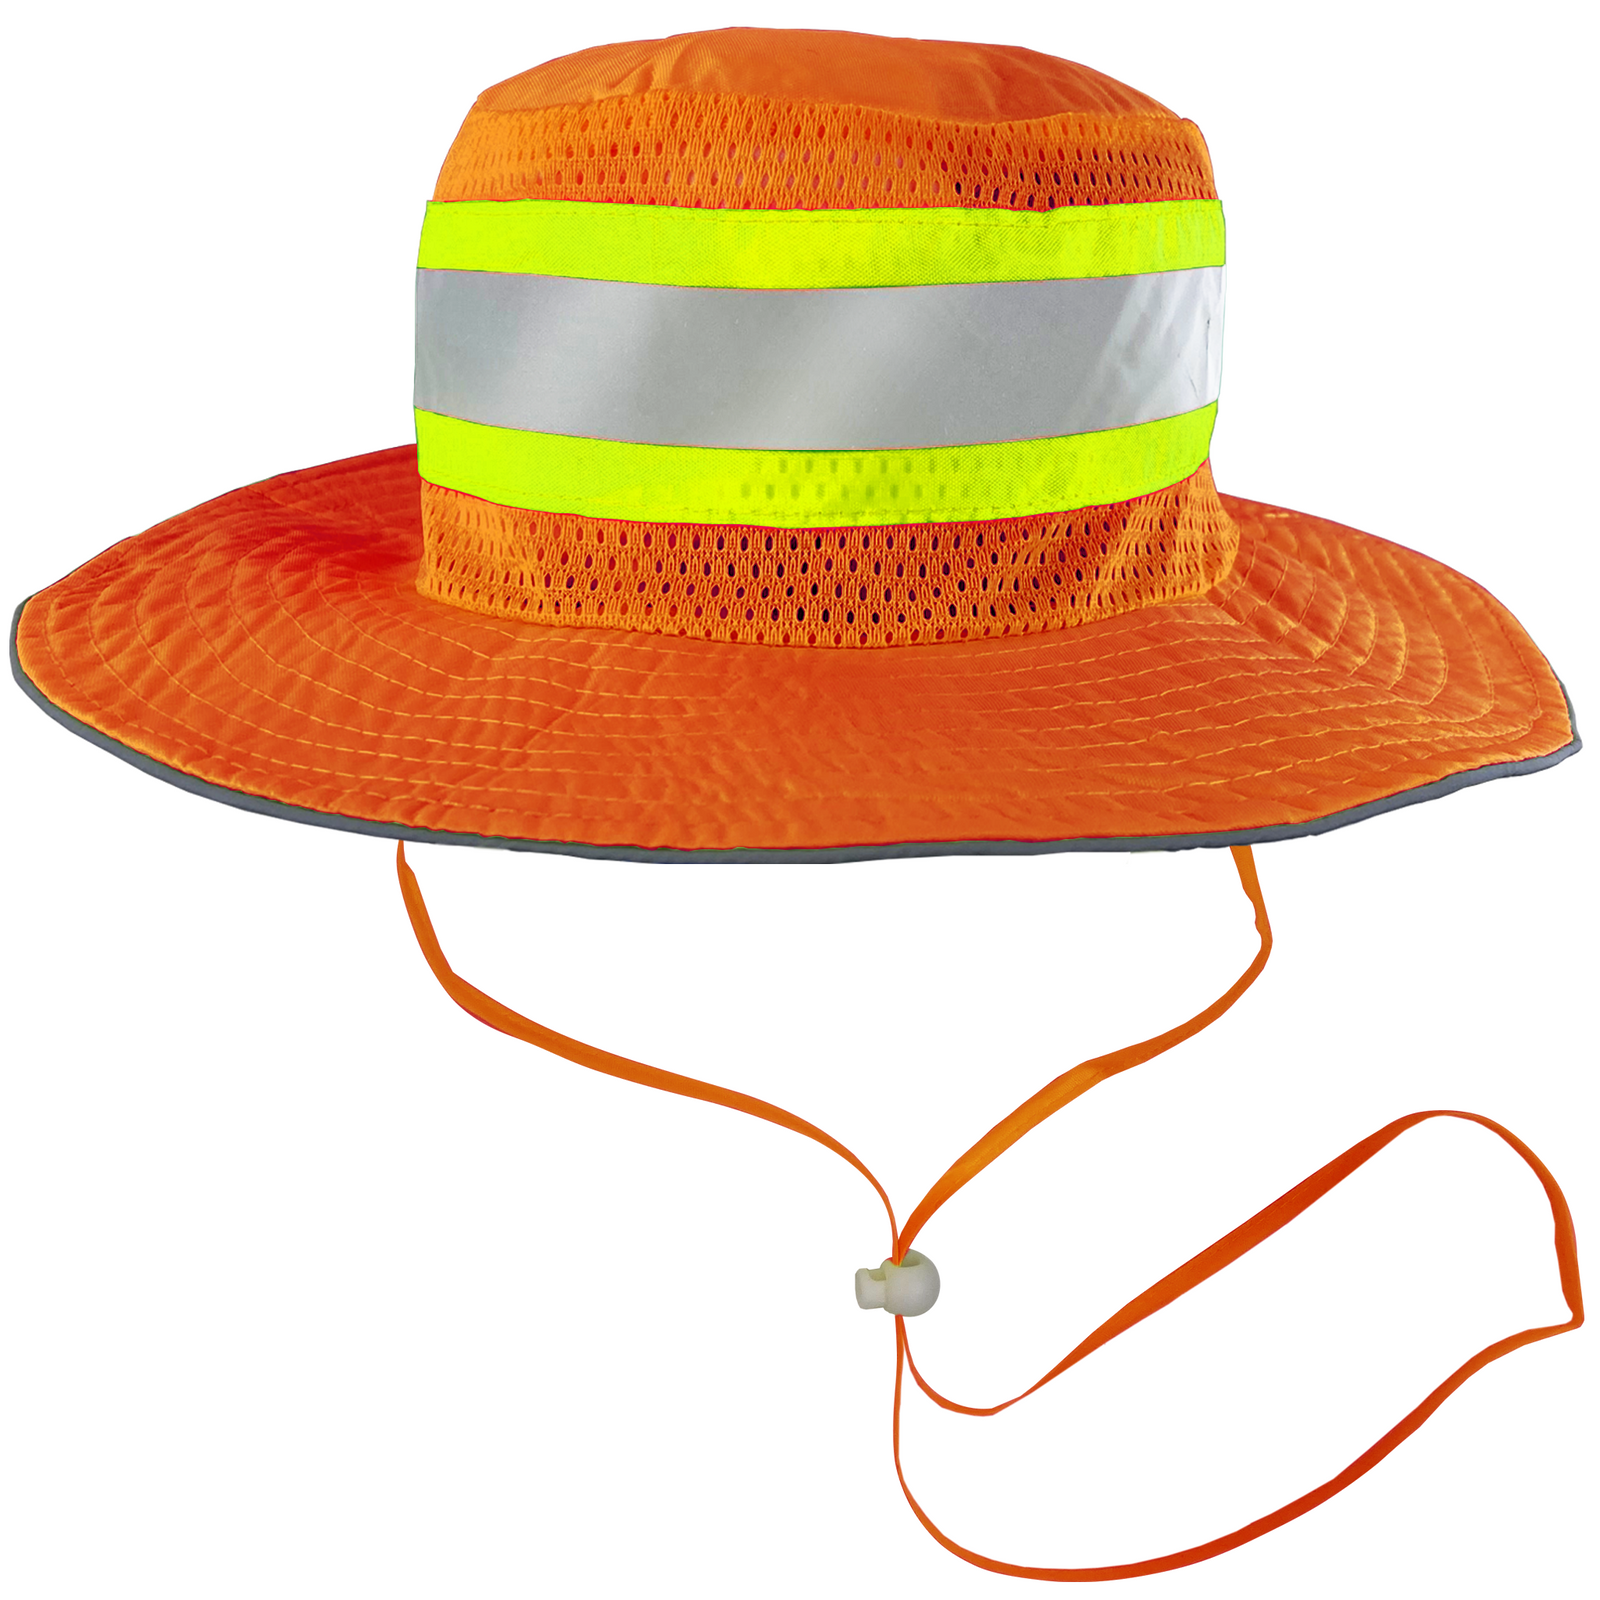 Features an orange safety bonnie with reflective stripes and an adjustable cord